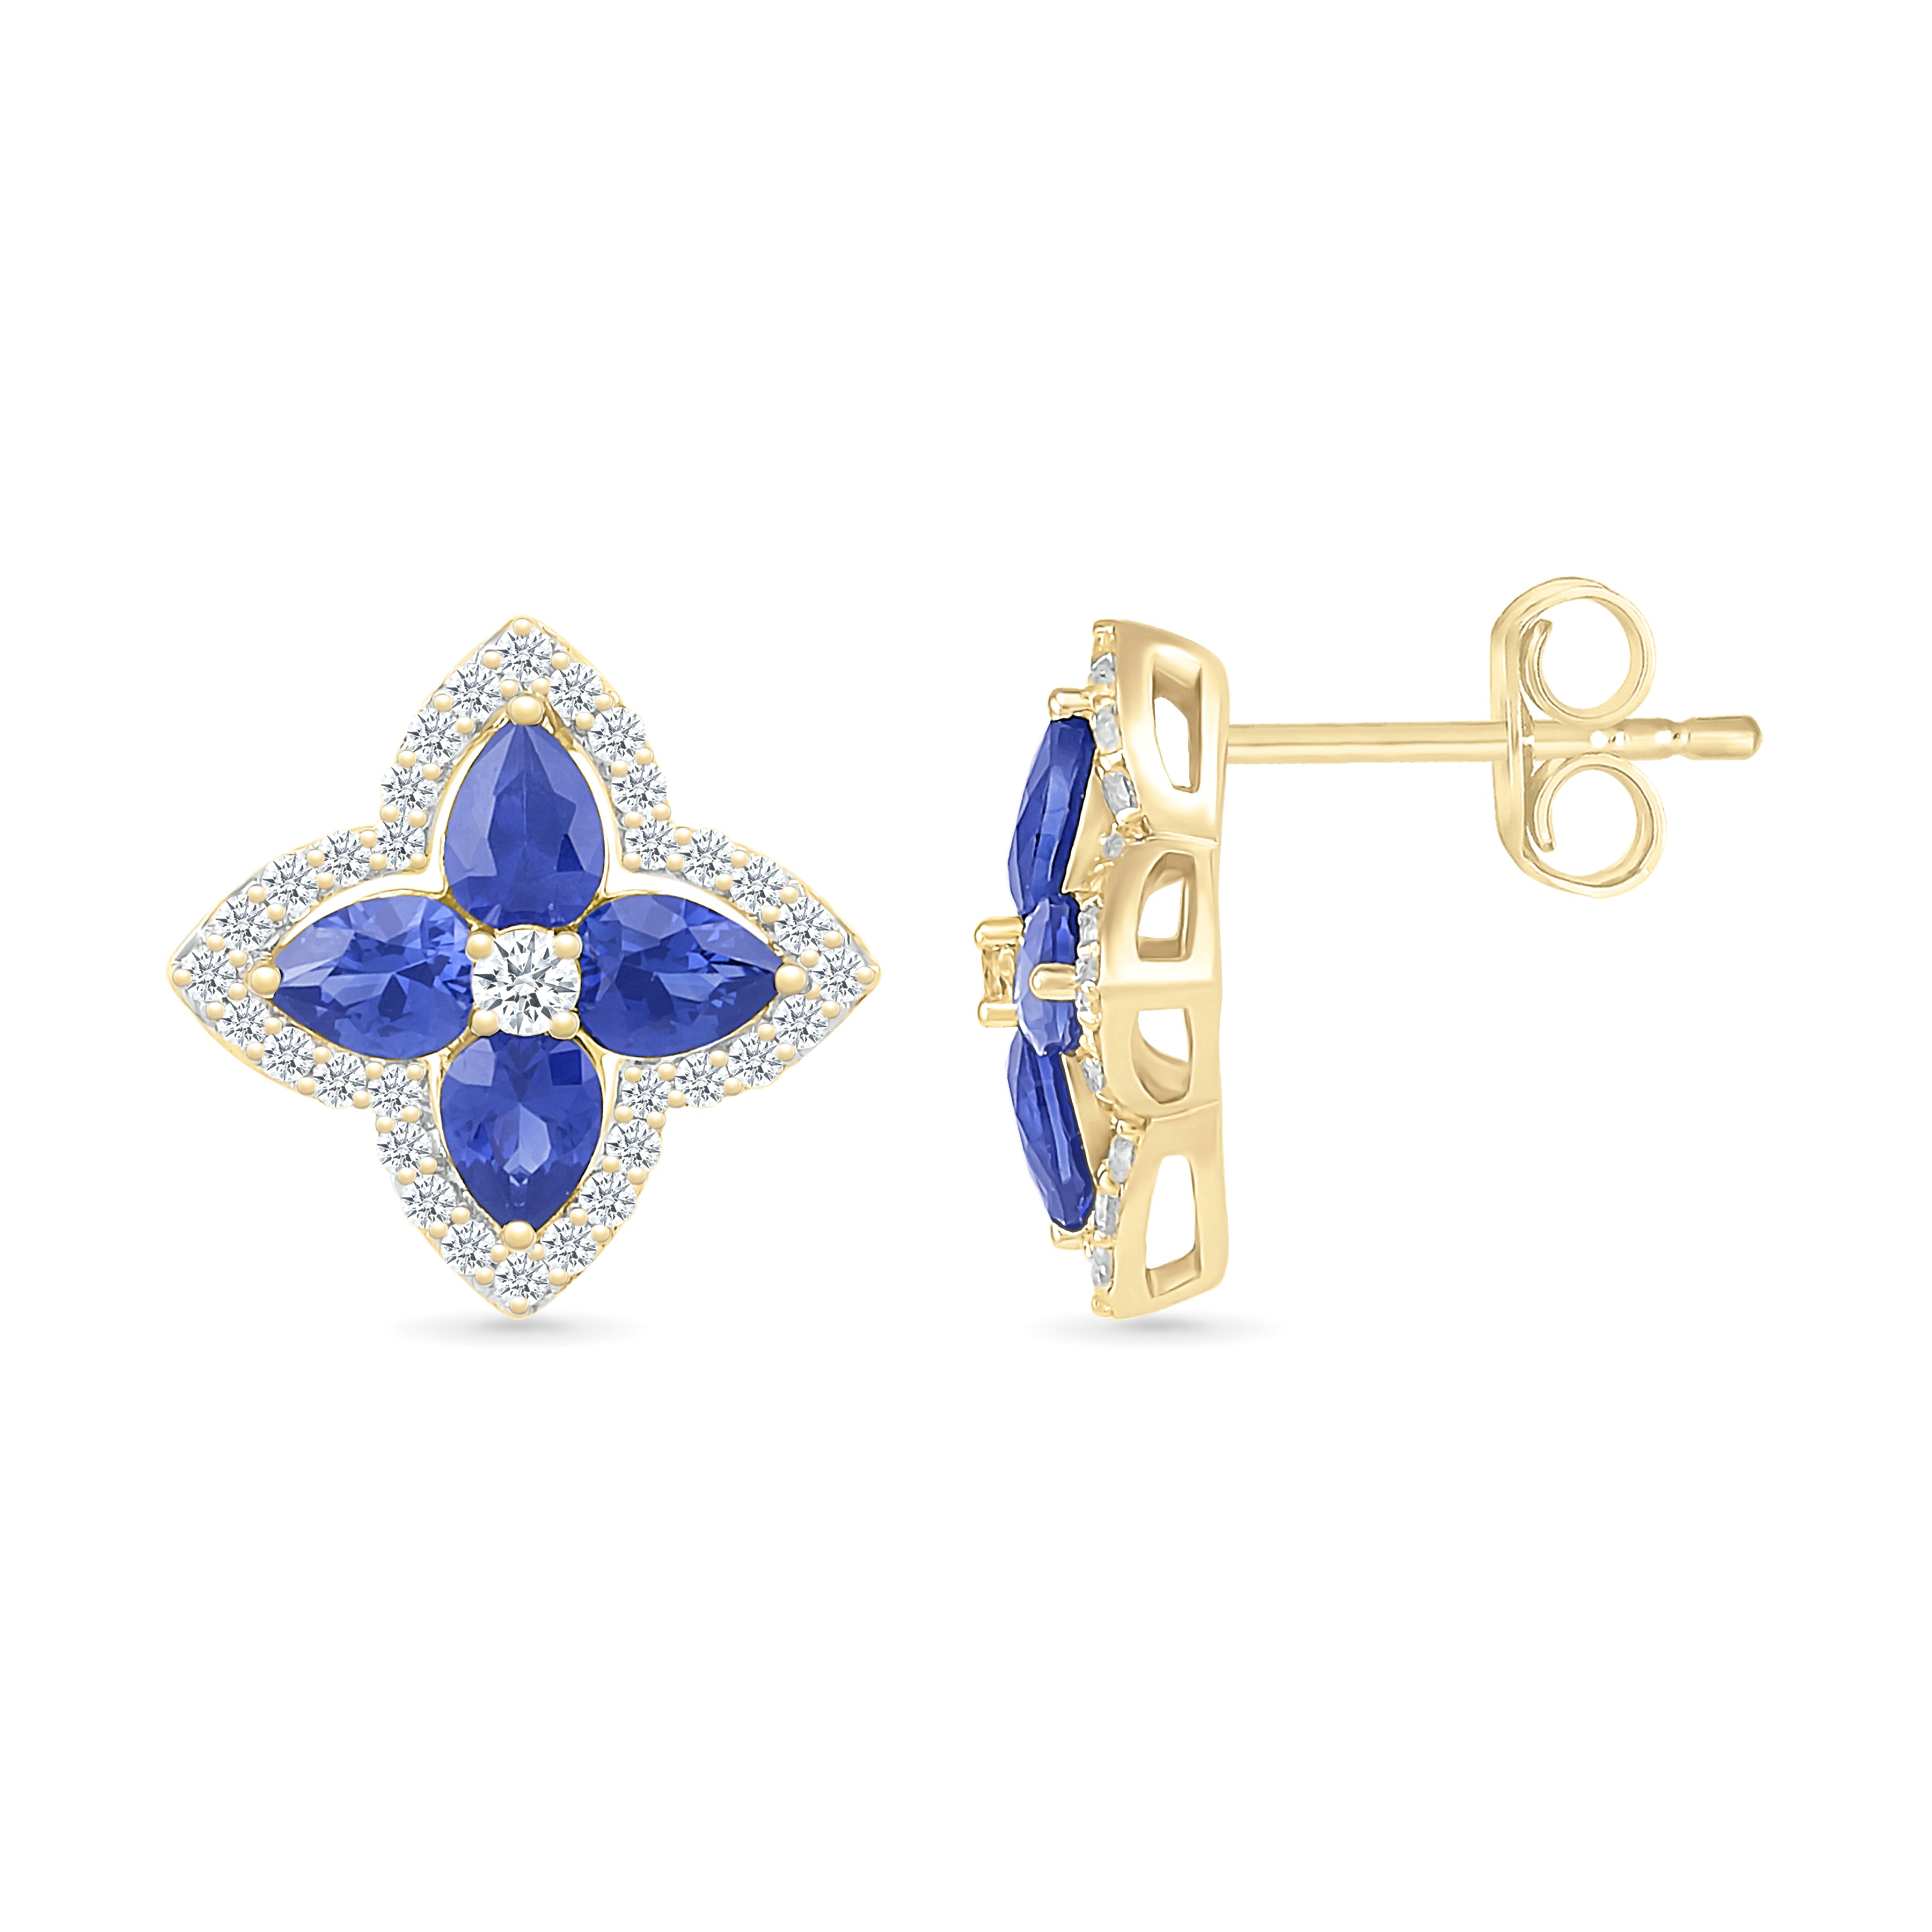 Blue Sapphire Clover Stud Earrings with White Sapphire Halo Earrings Estella Collection #product_description# 32657 10k Birthstone blue #tag4# #tag5# #tag6# #tag7# #tag8# #tag9# #tag10#